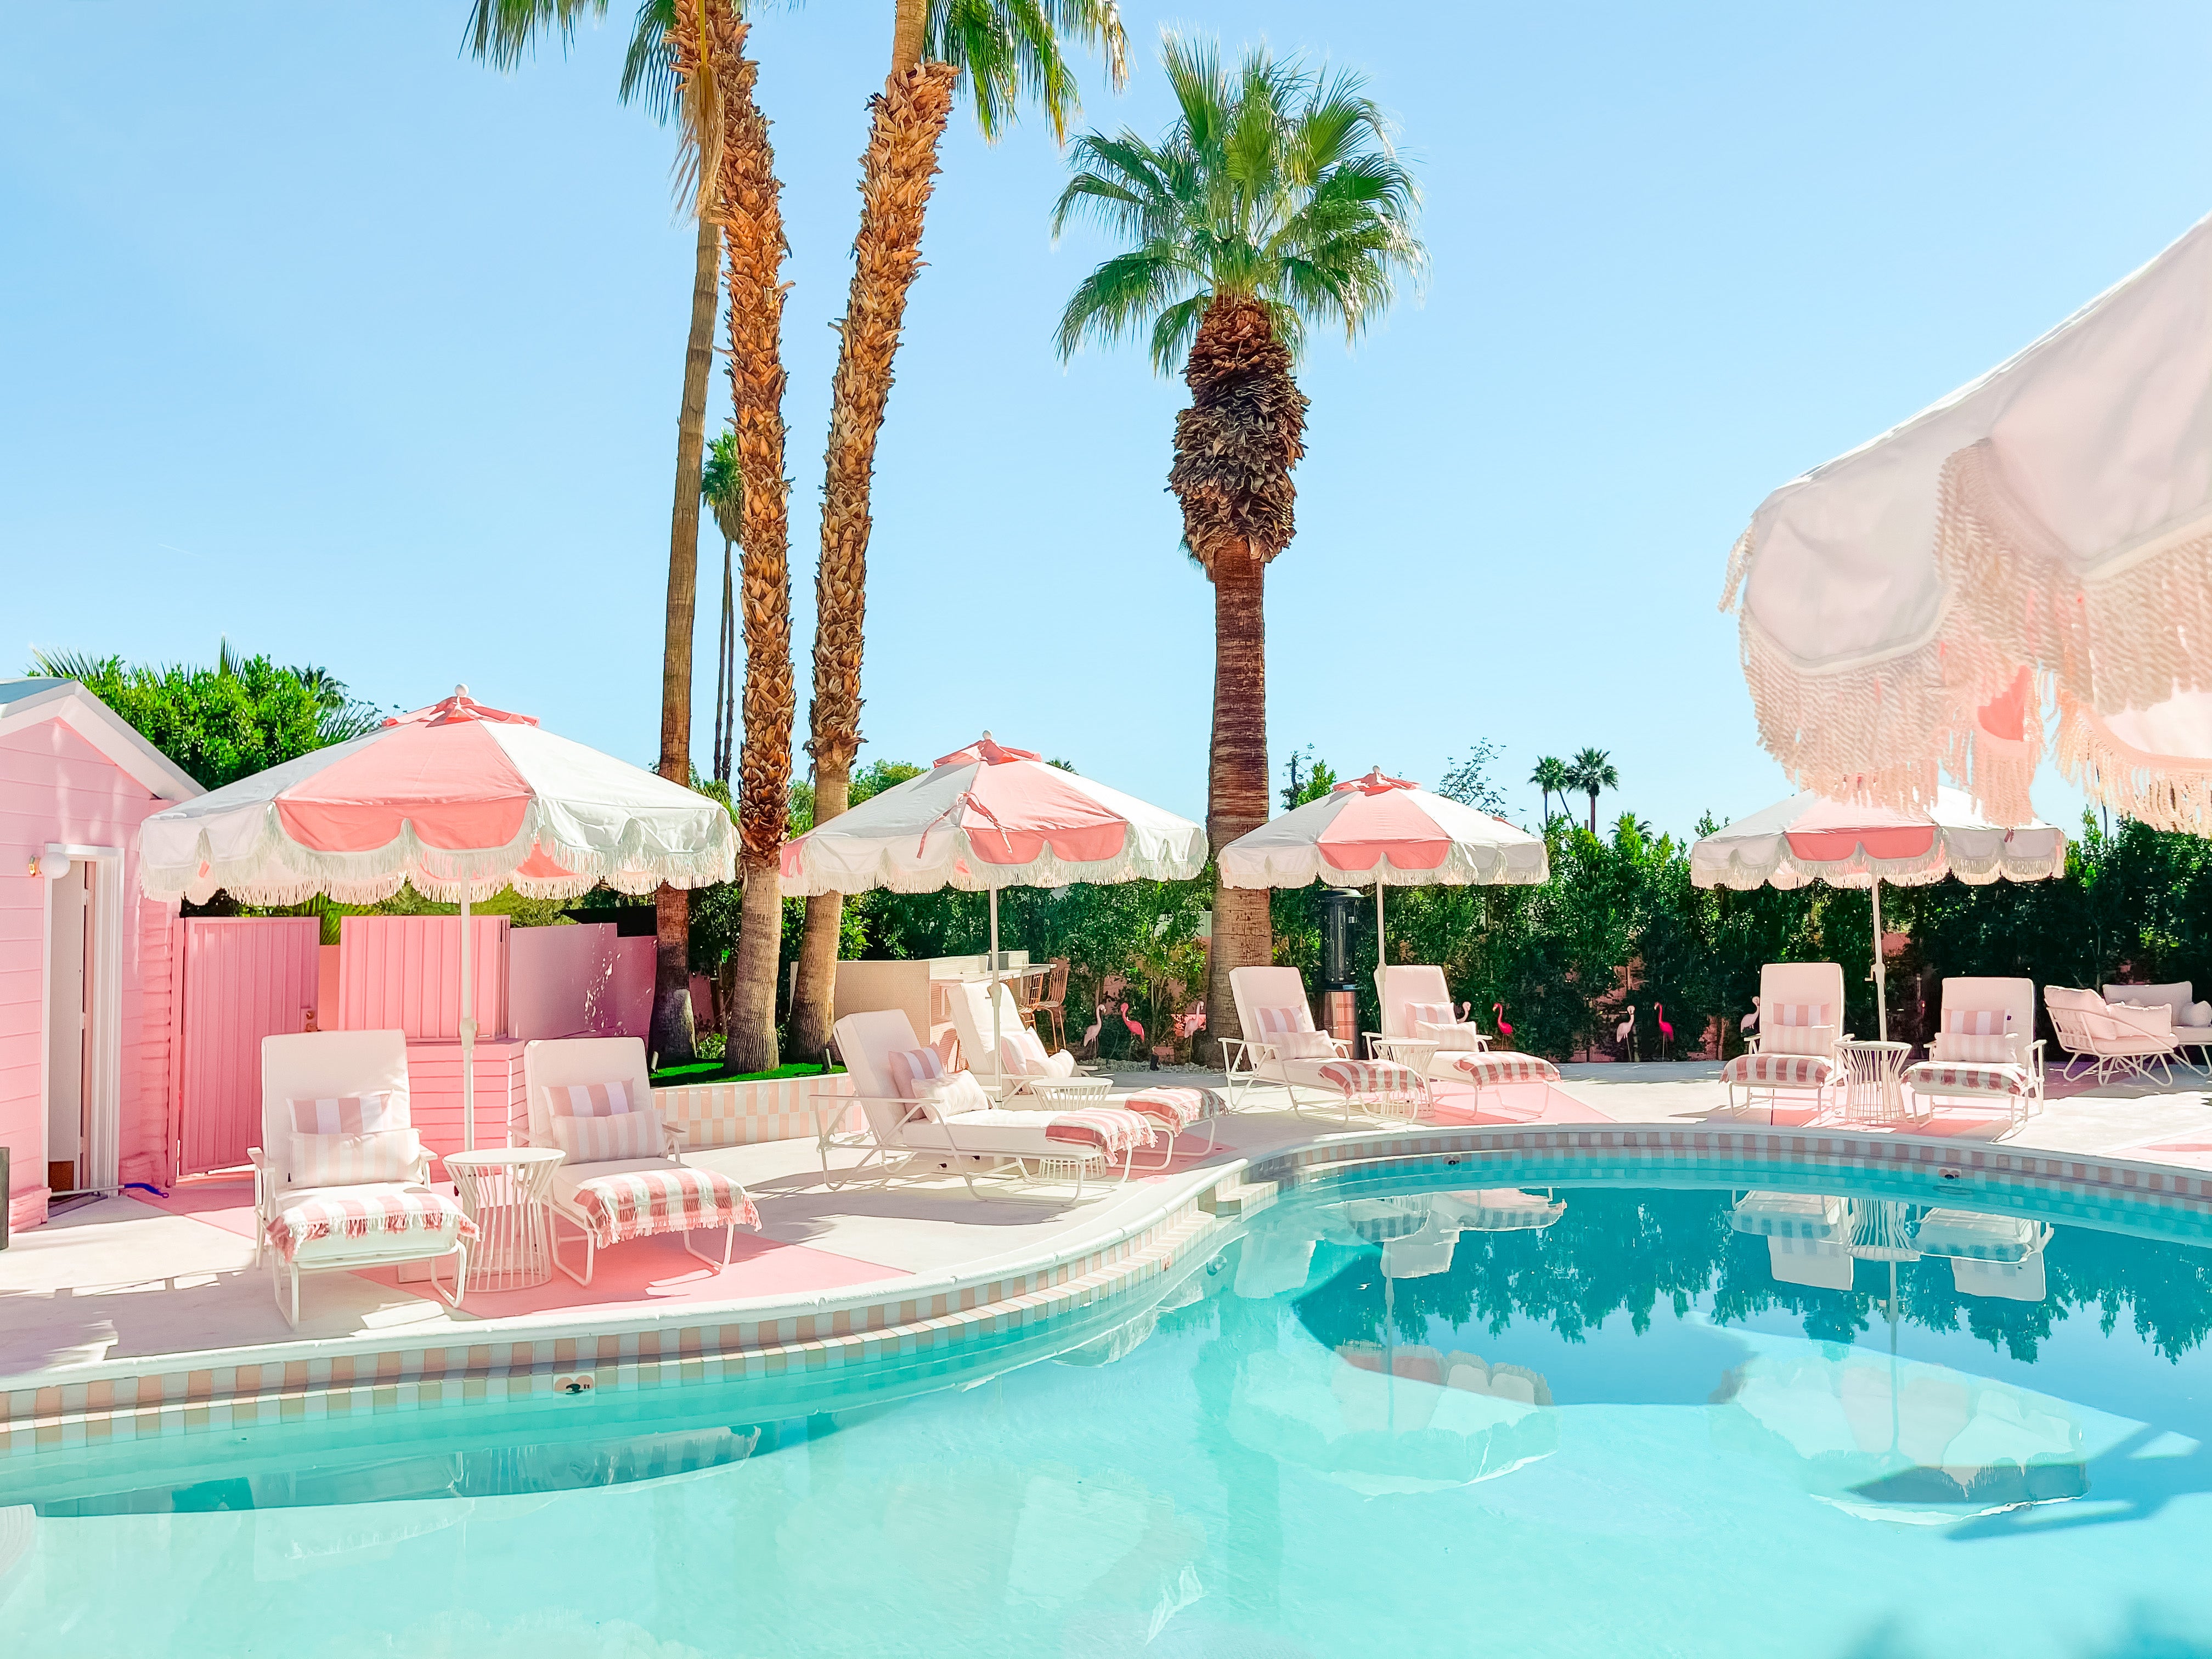 Palm Springs Trixie Motel is a seven-room vintage-inspired oasis